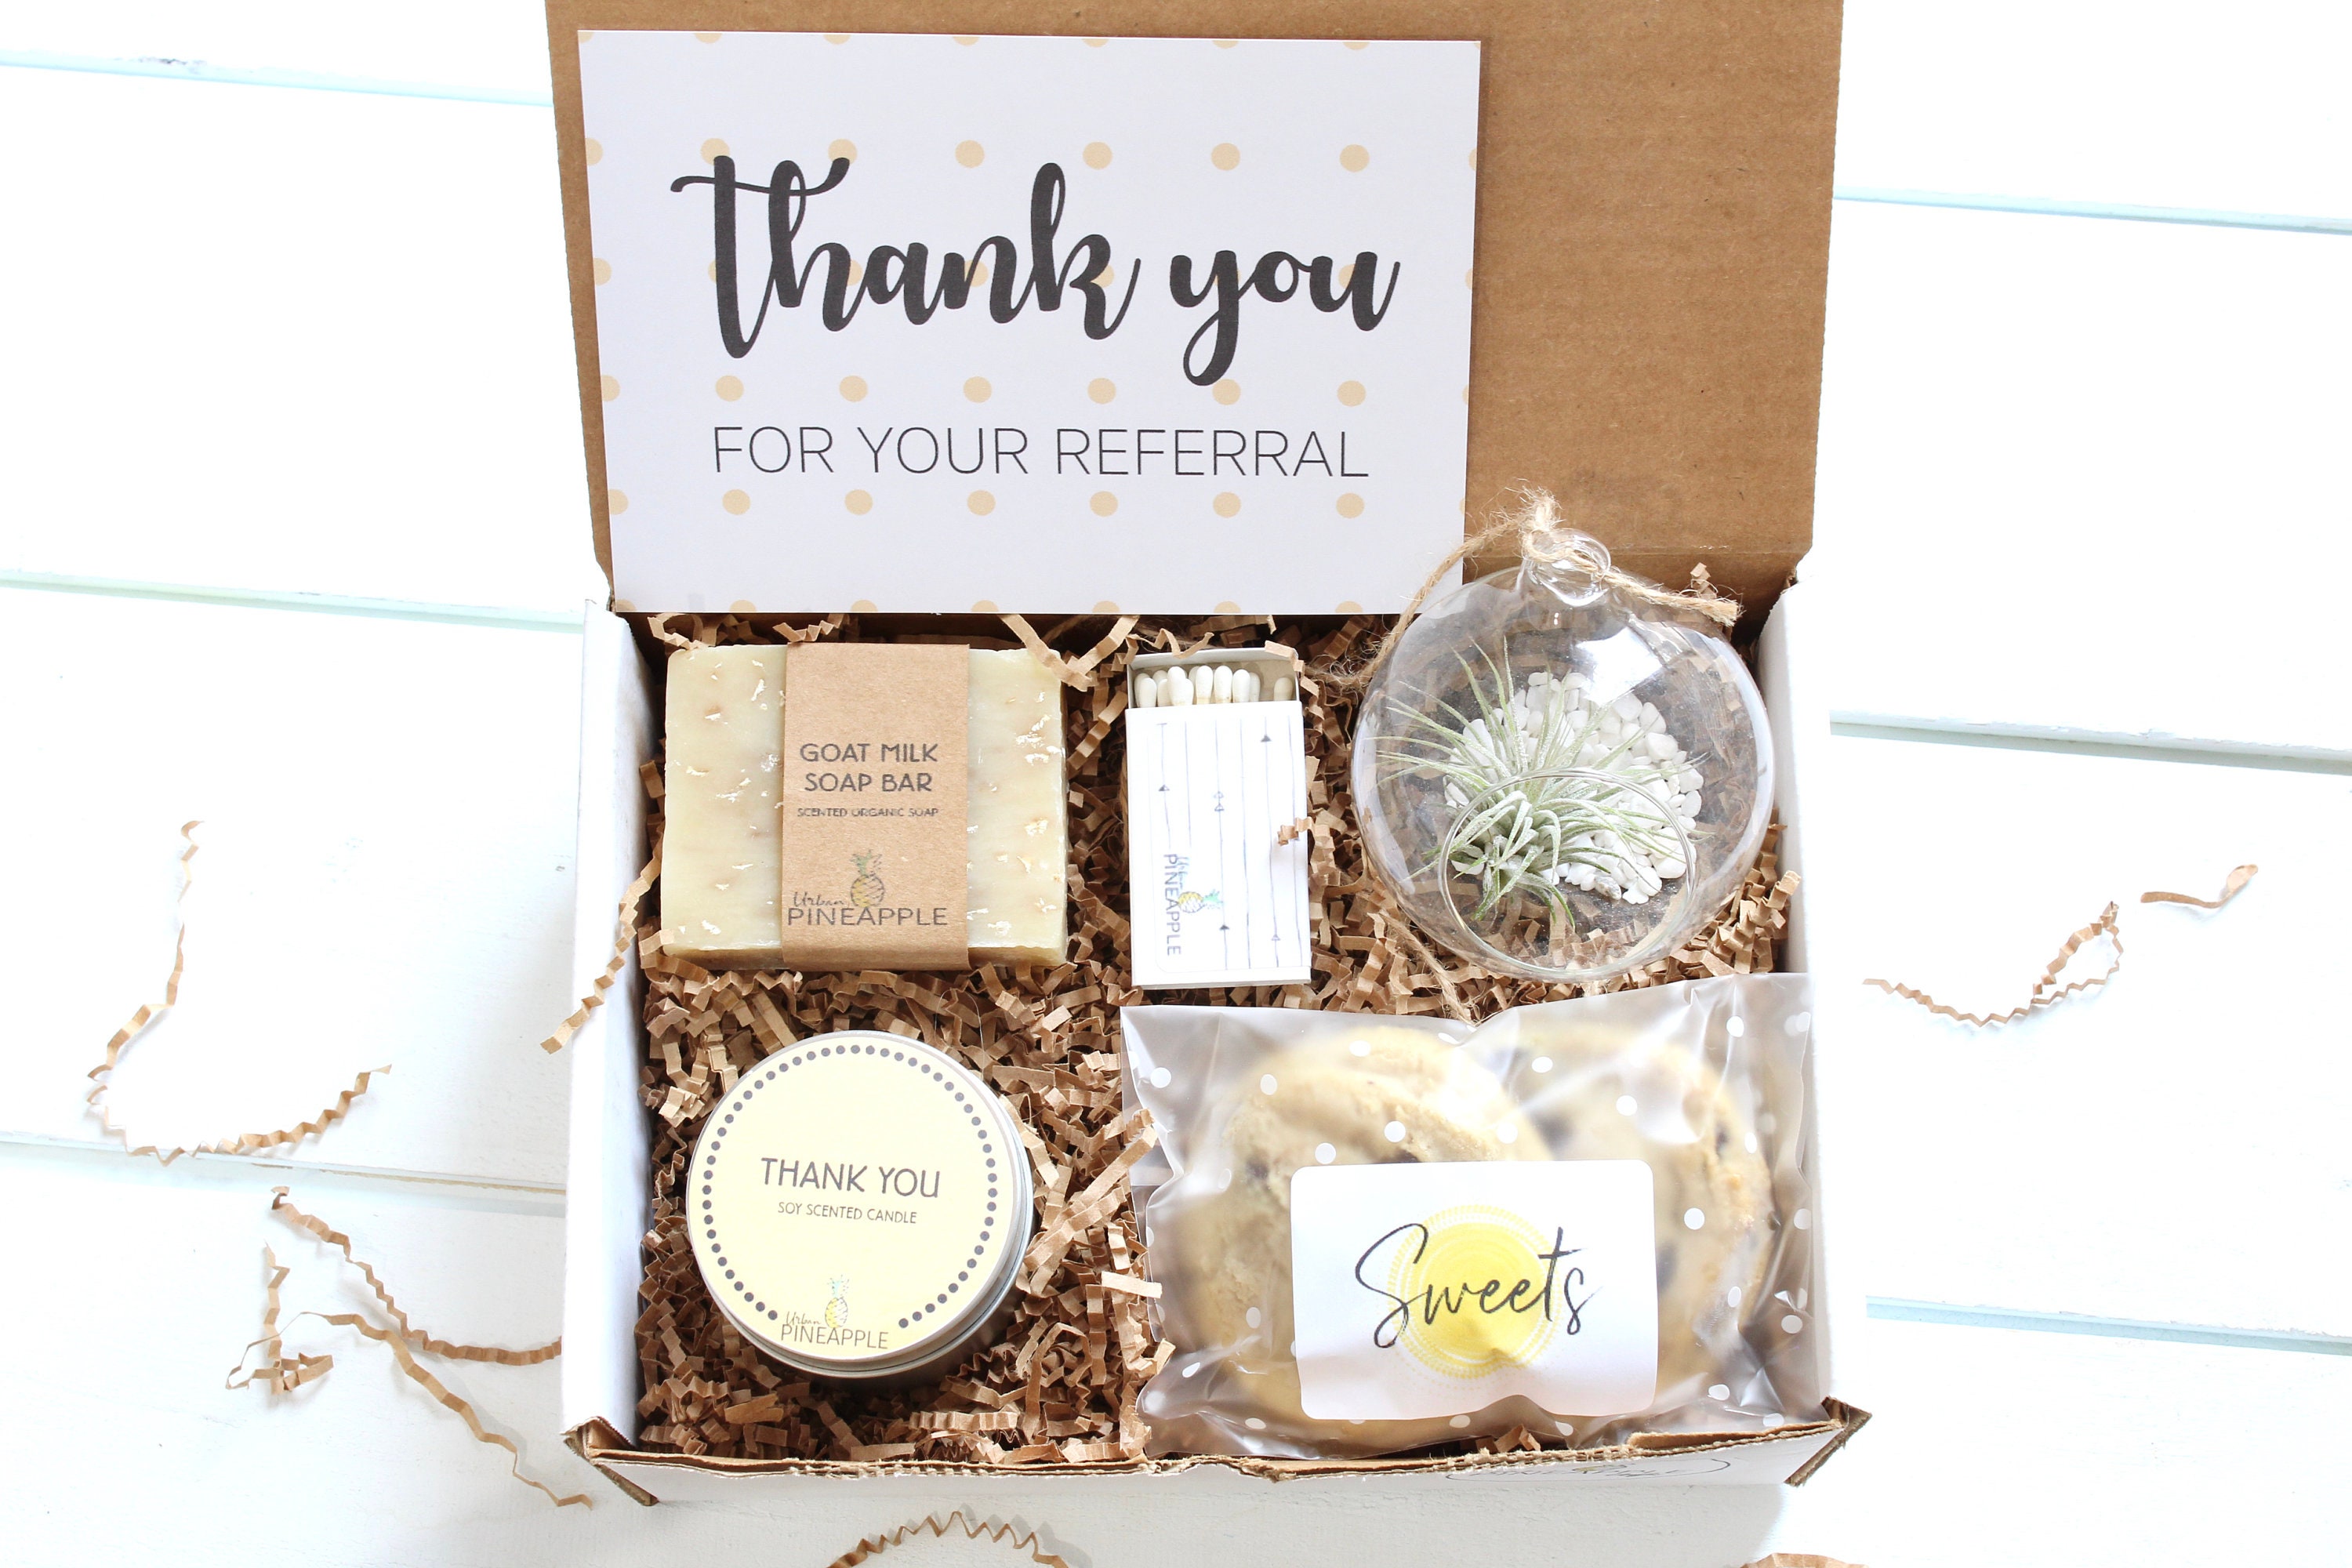 30 Free Gift Ideas to Thank Your Customers